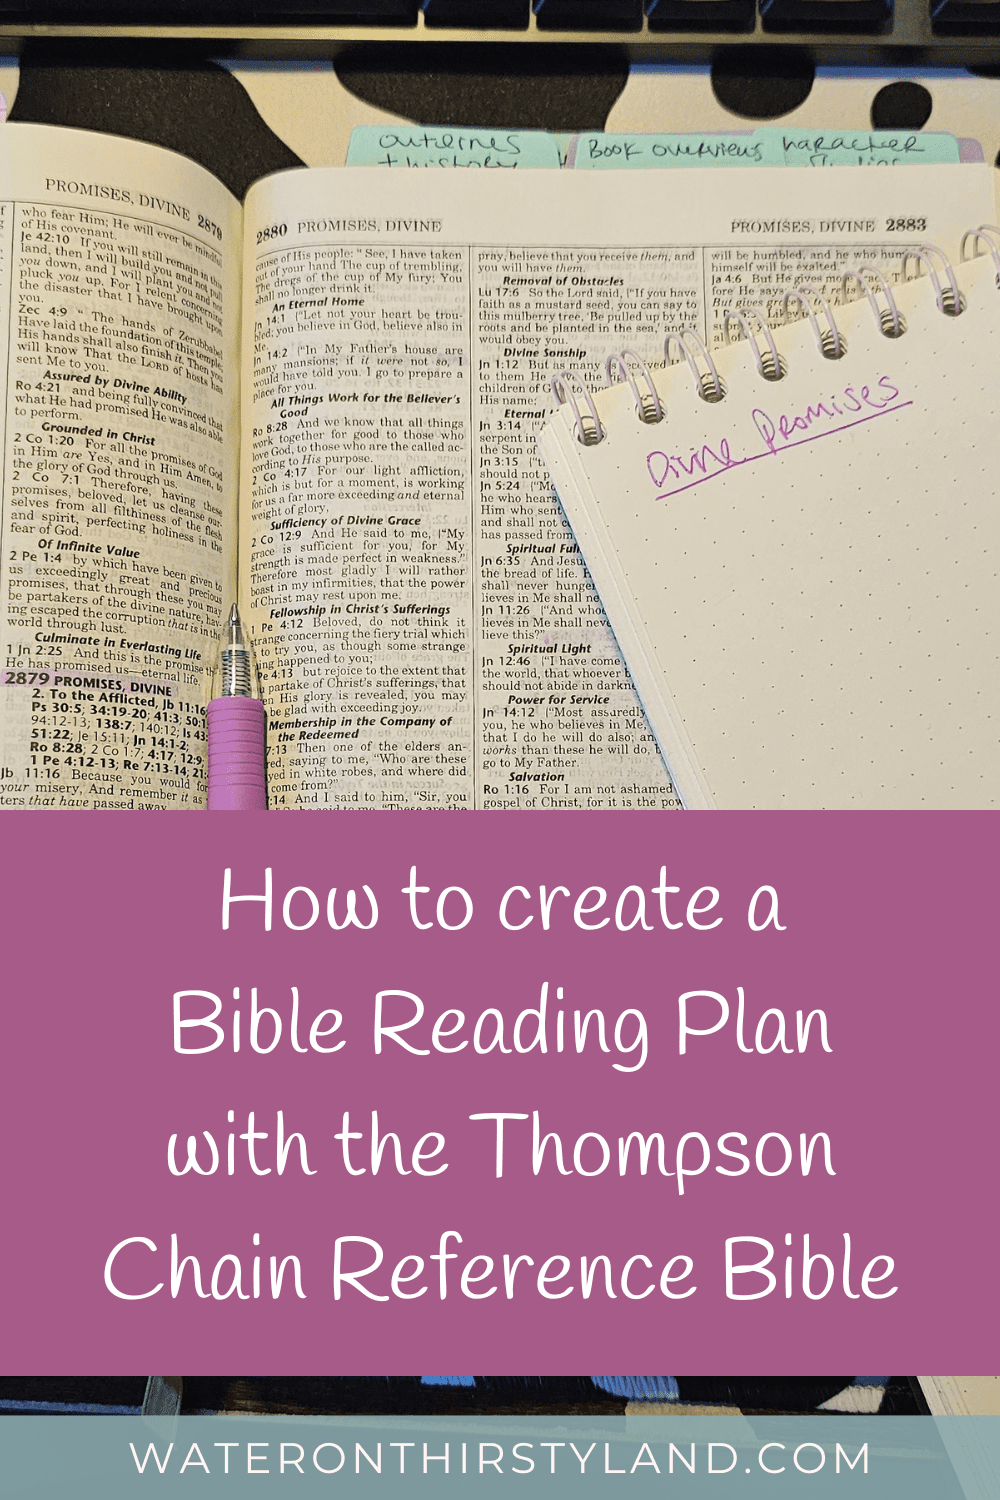 How to create a Bible Reading Plan with the Thompson Chain Reference Bible